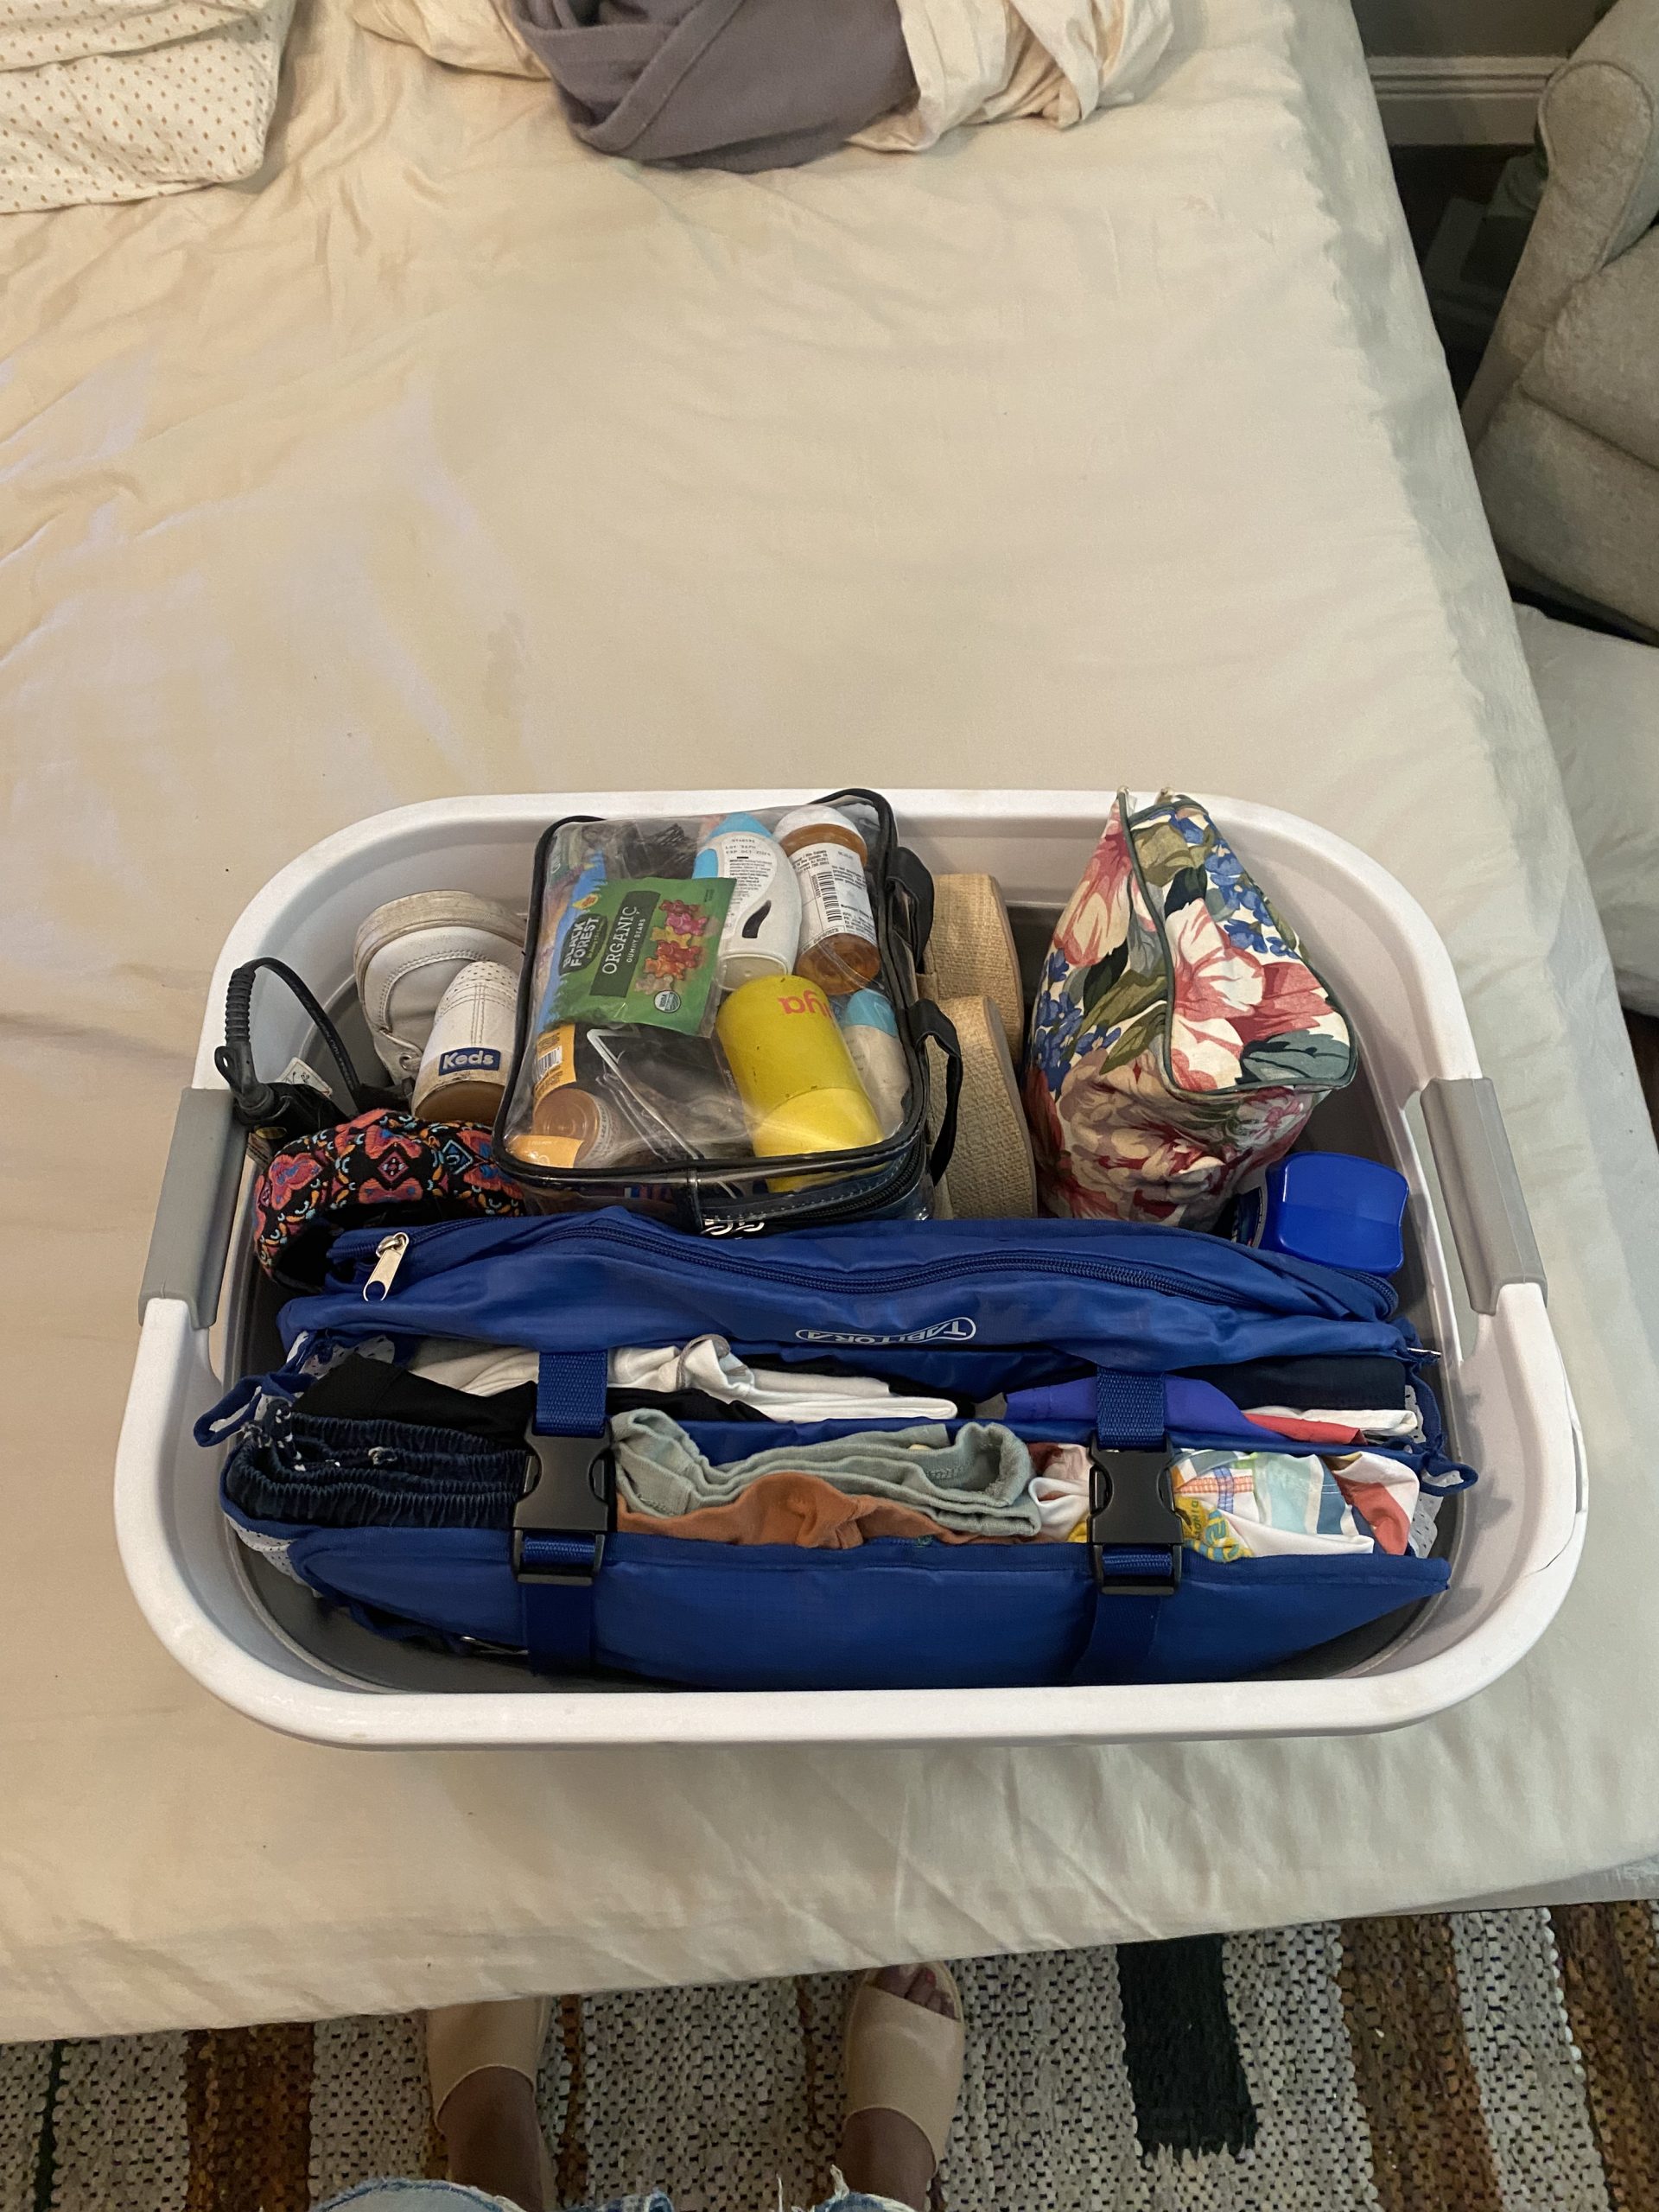 laundry basket full of clothes and toiletries